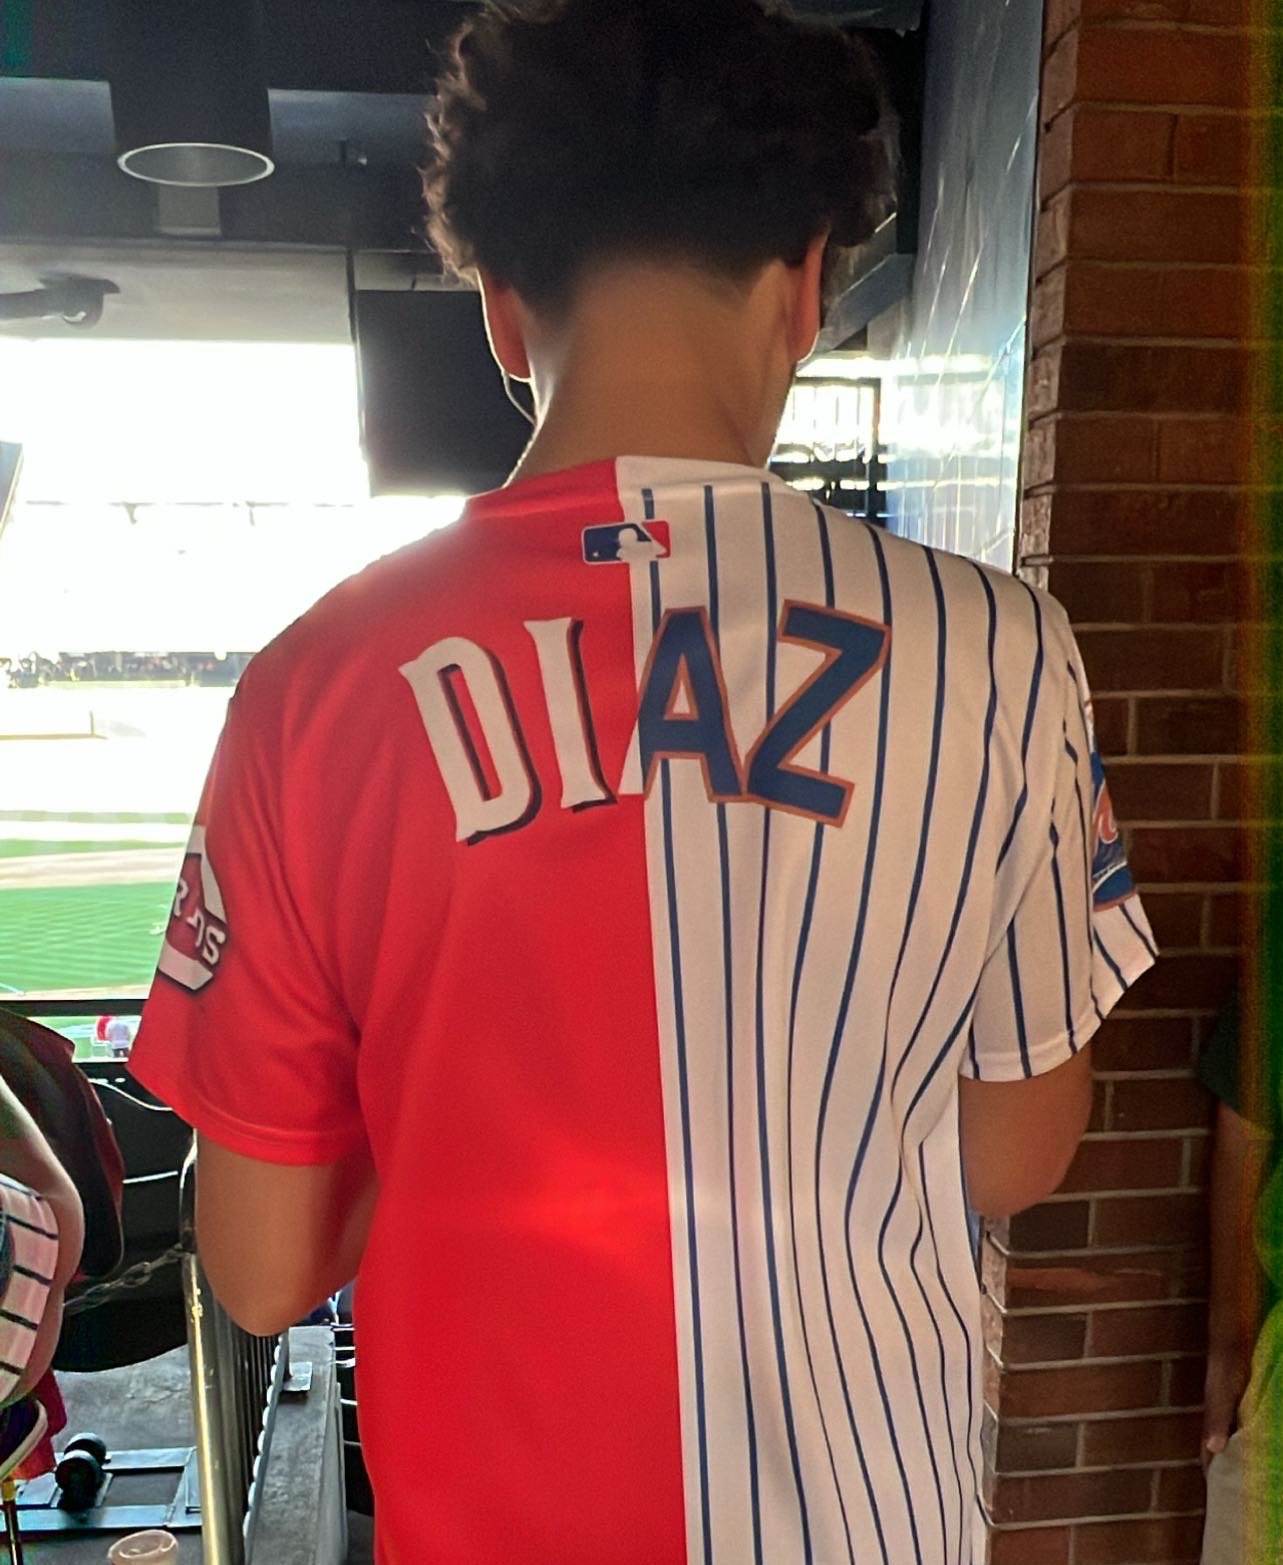 Mets'd Up Podcast on X: The Diaz family is in attendance today